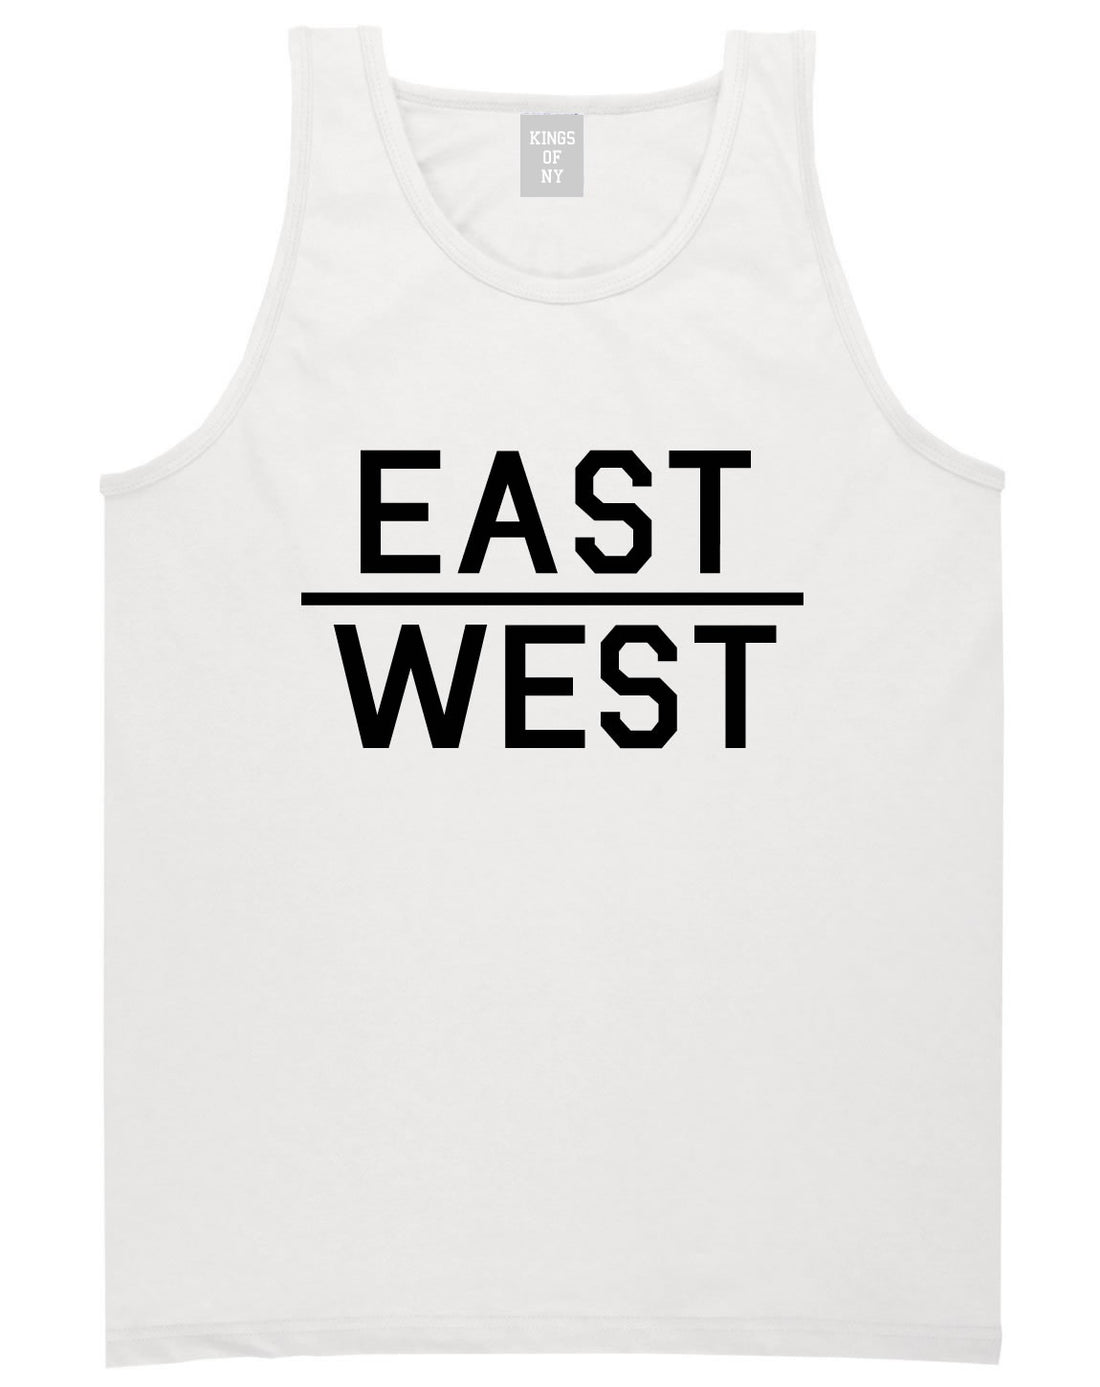 East West Tank Top in White by Kings Of NY